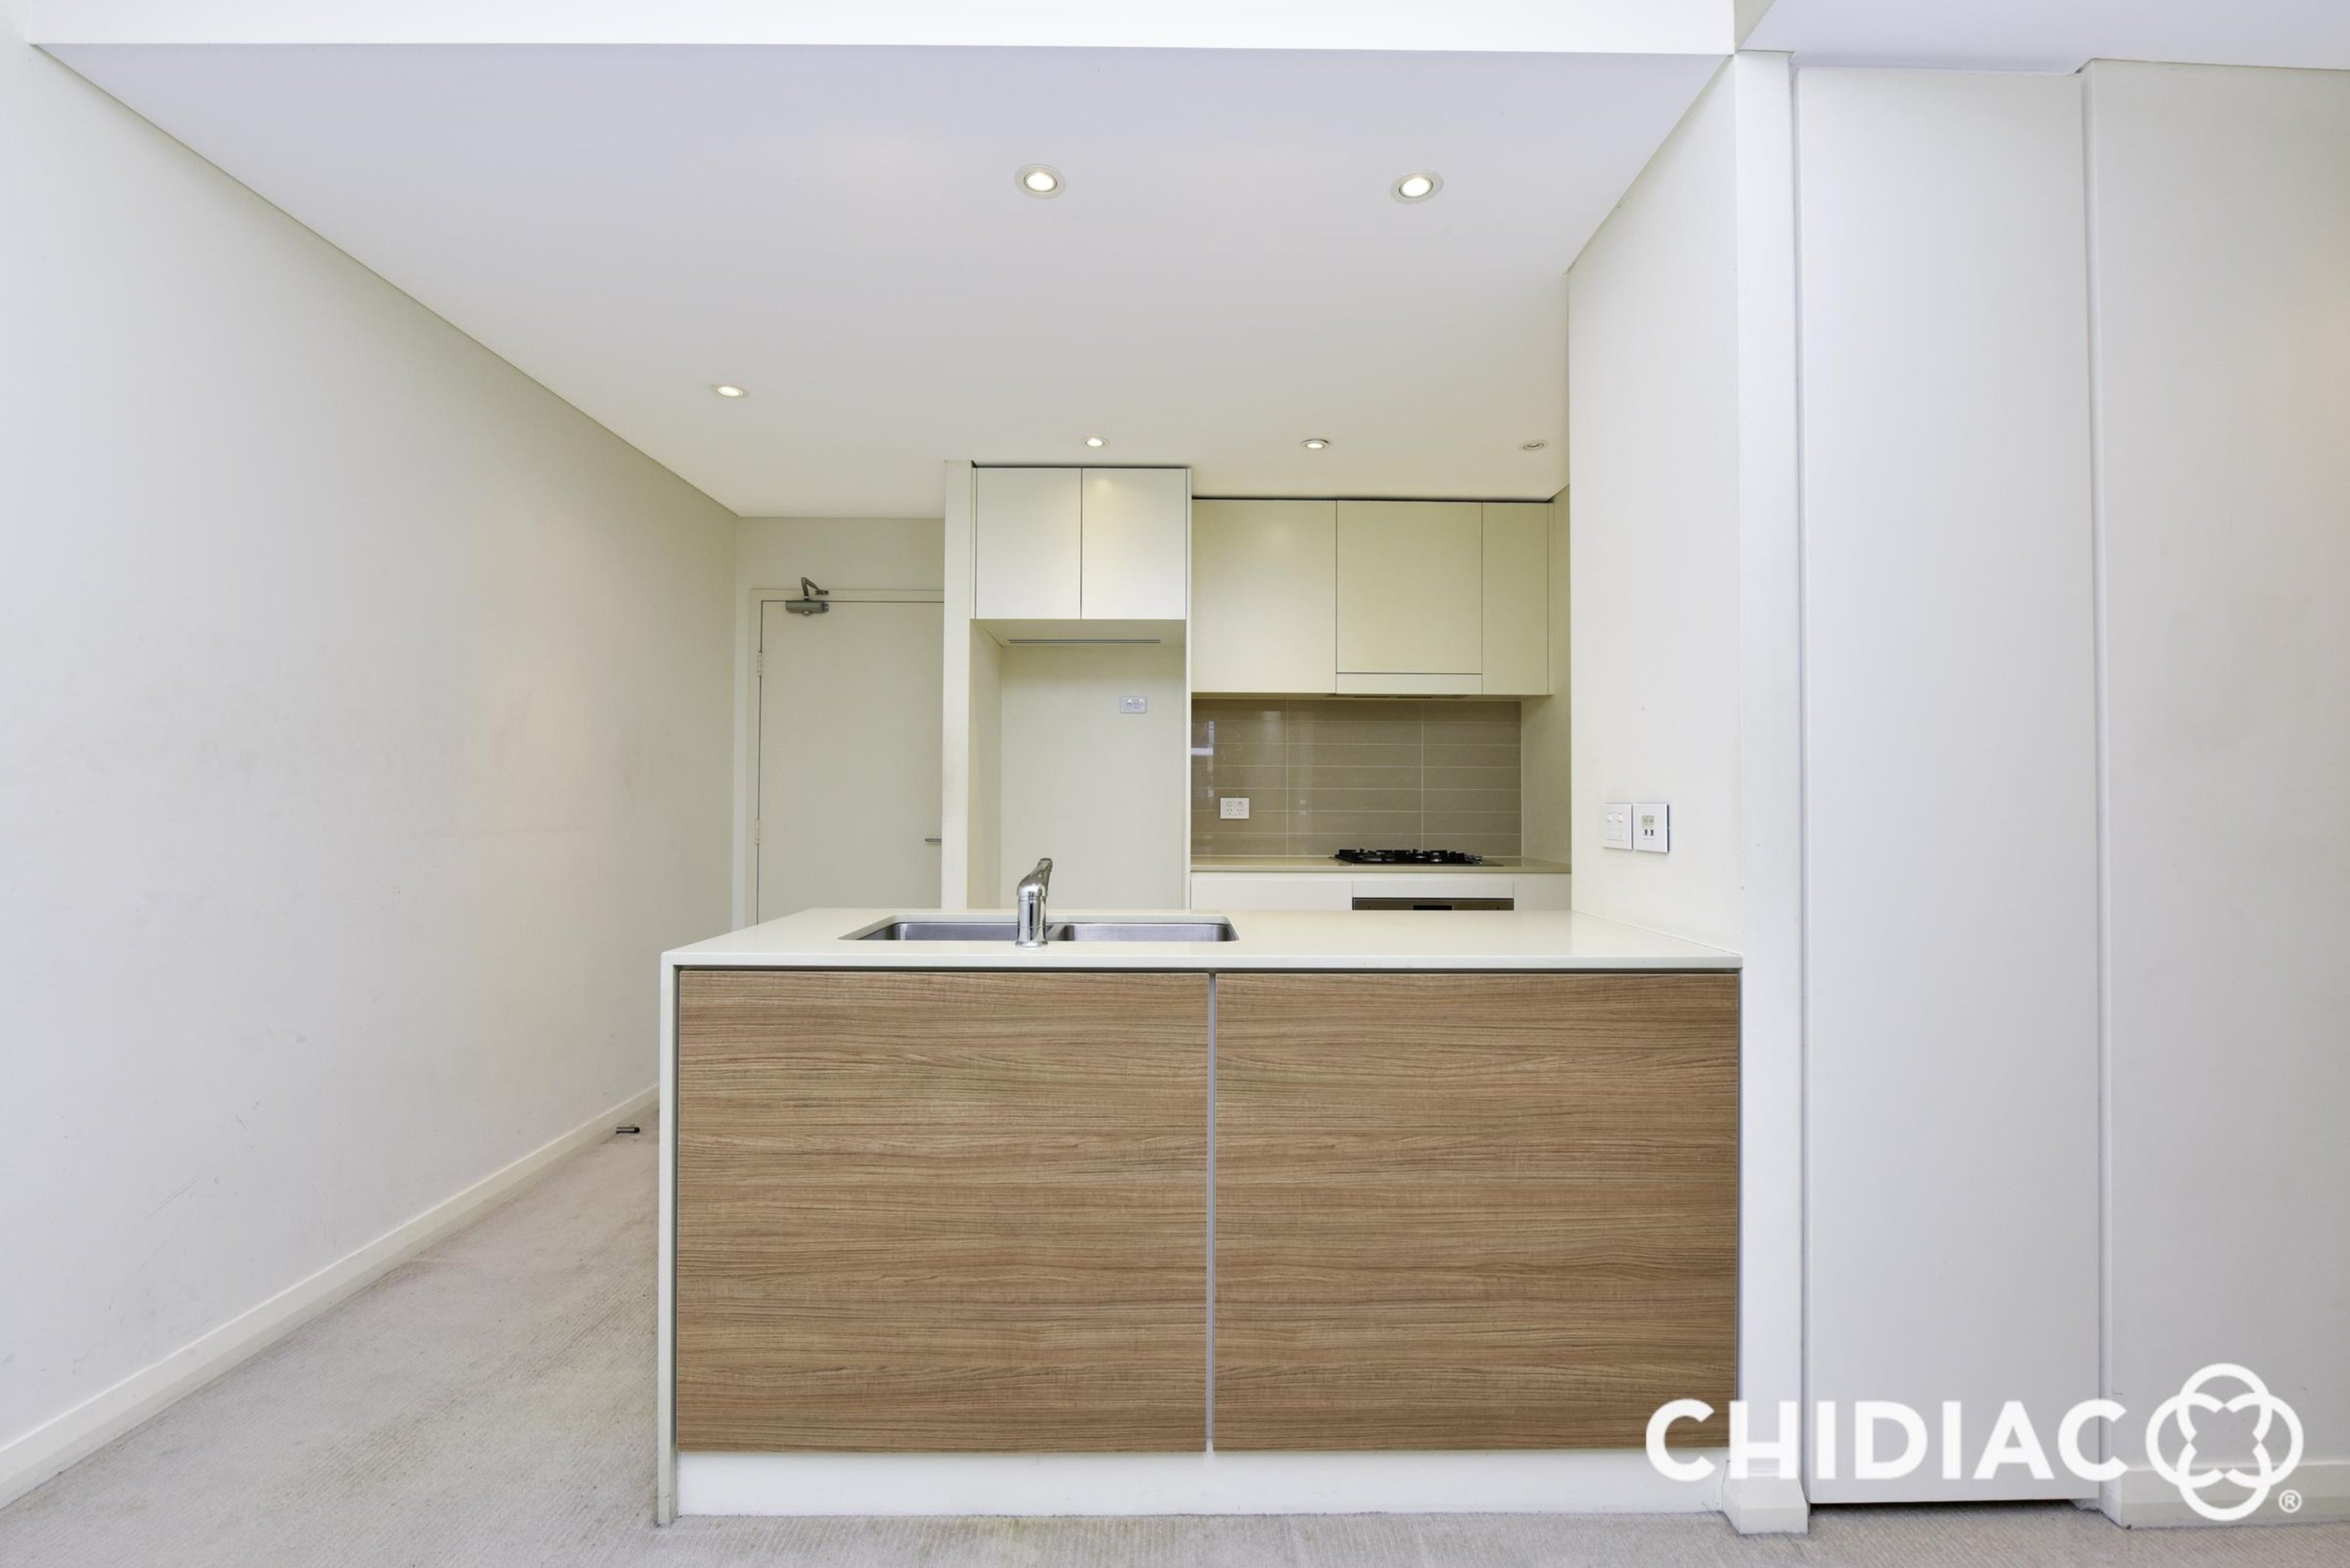 110/4 Baywater Drive, Wentworth Point Leased by Chidiac Realty - image 3